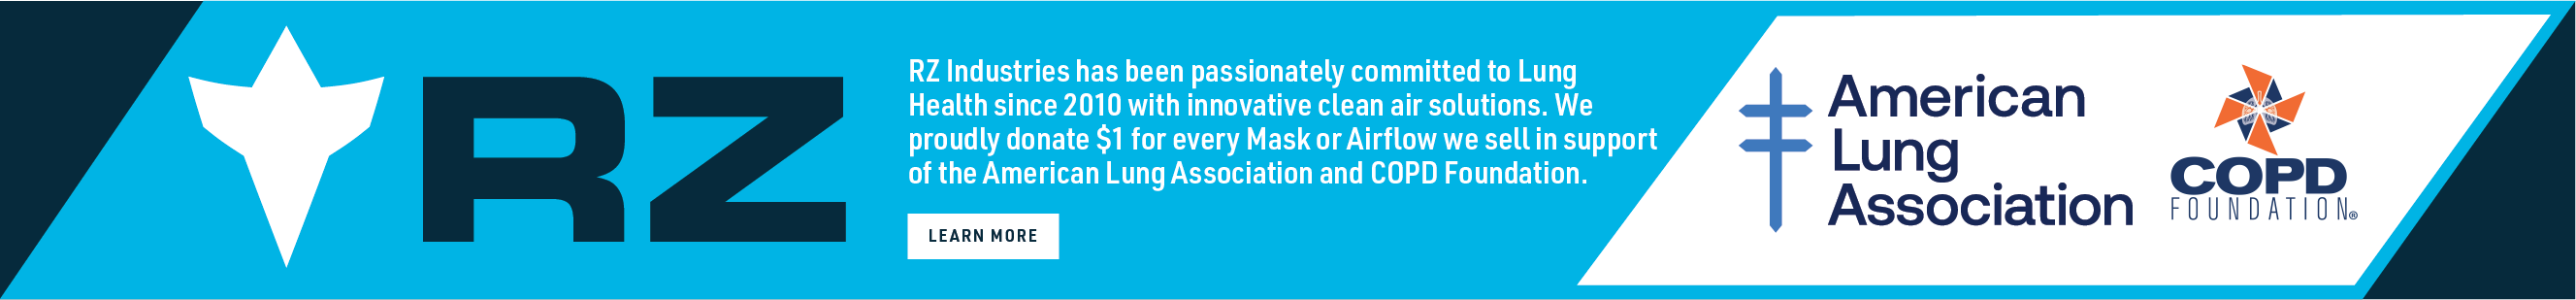 RZ Mask support the American Lung Association (ALA) and the COPD Foundation by donating $1 for every mask sold to each respective organization.